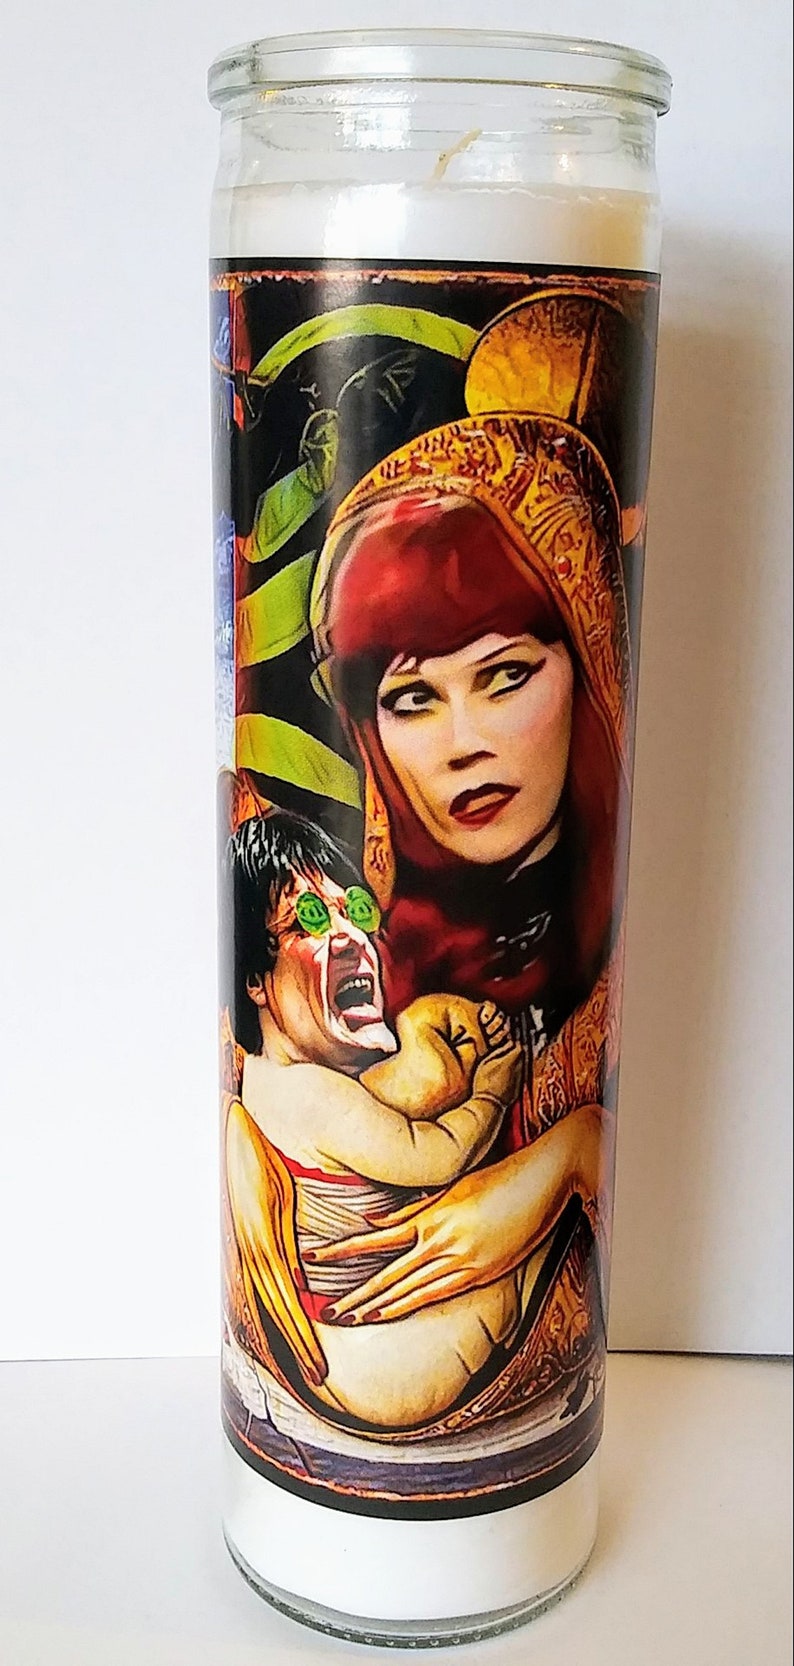 Our Lady and Lord of the Cramps Prayer Candle Lux and Ivy image 2